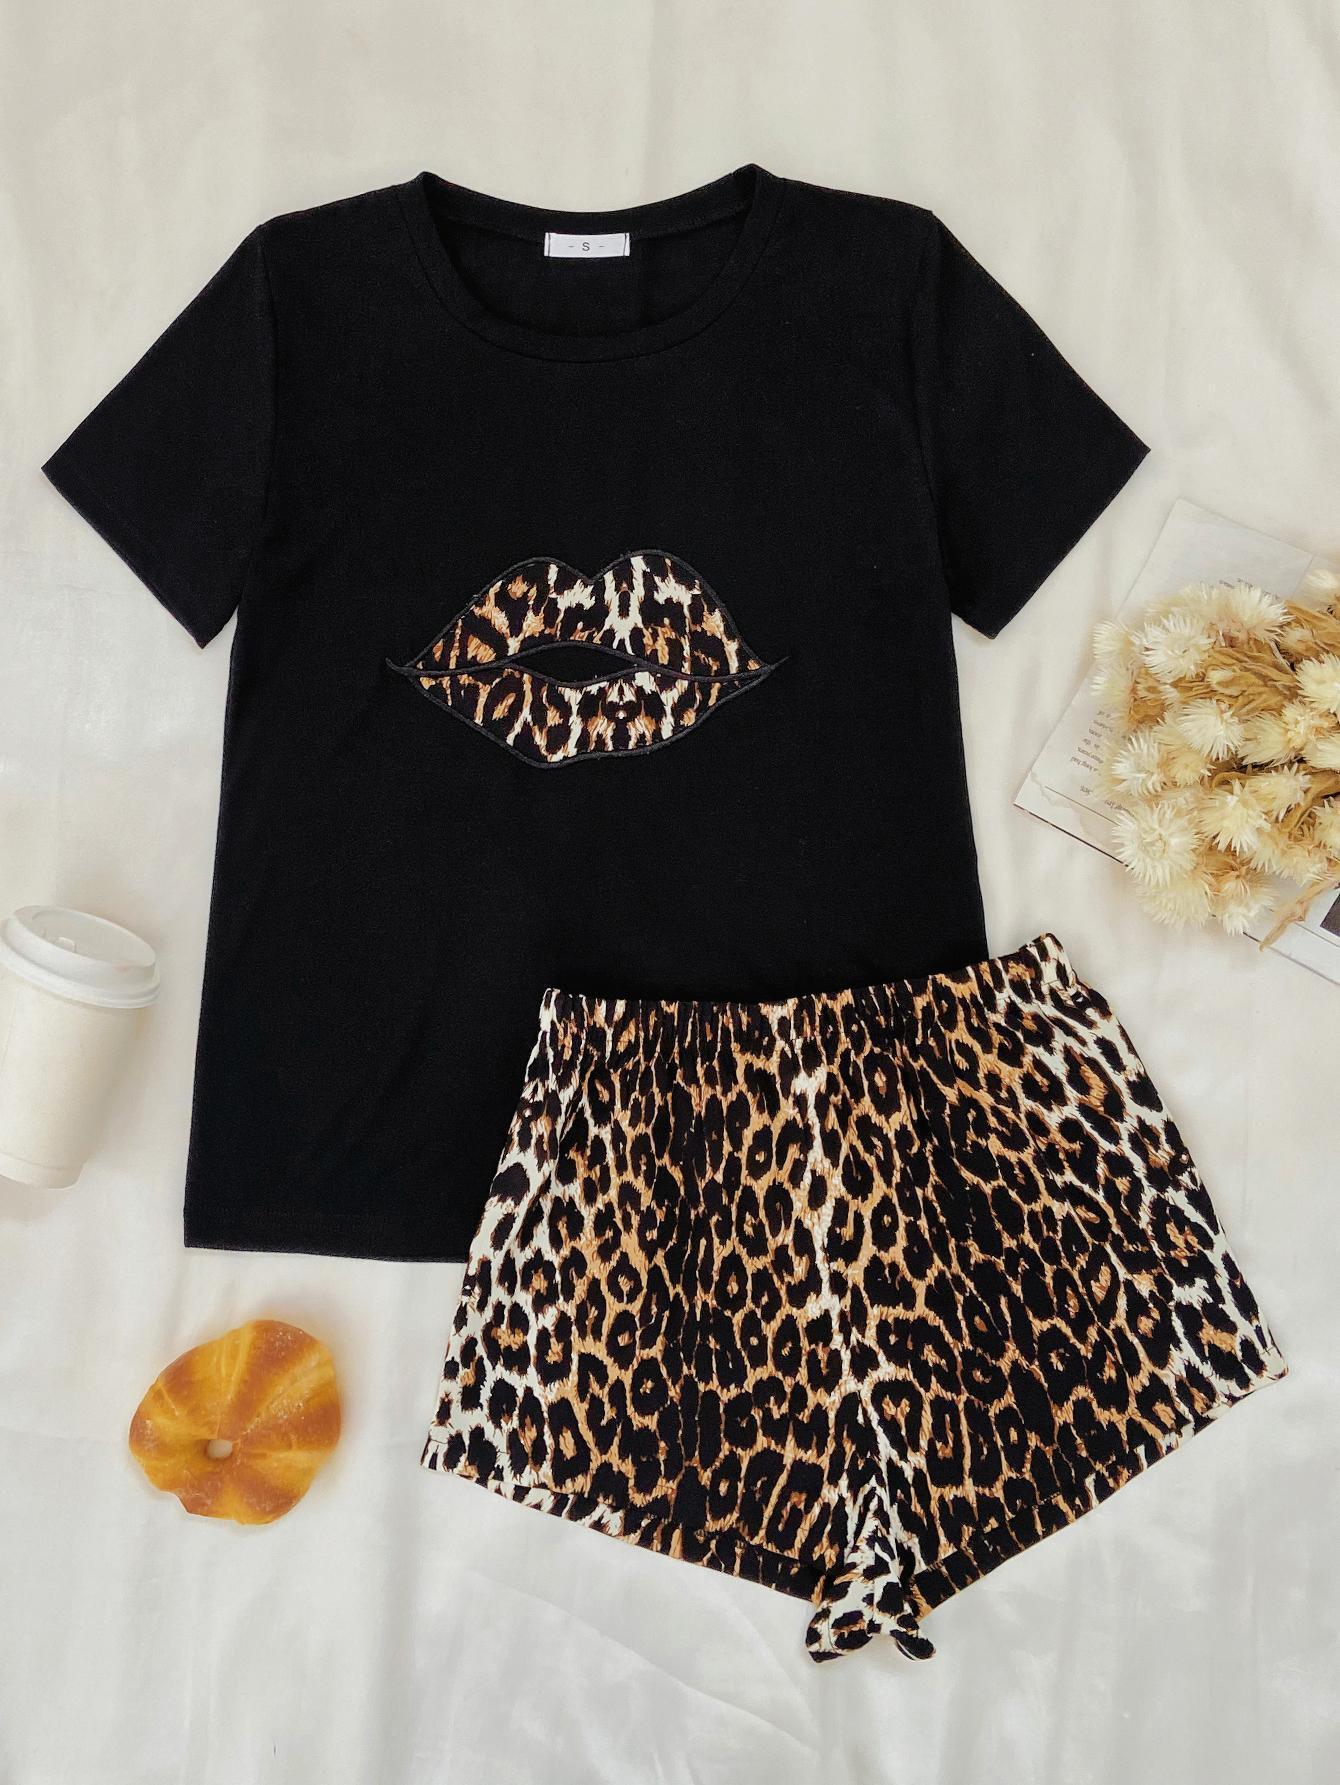 a black shirt and leopard print shorts on a bed